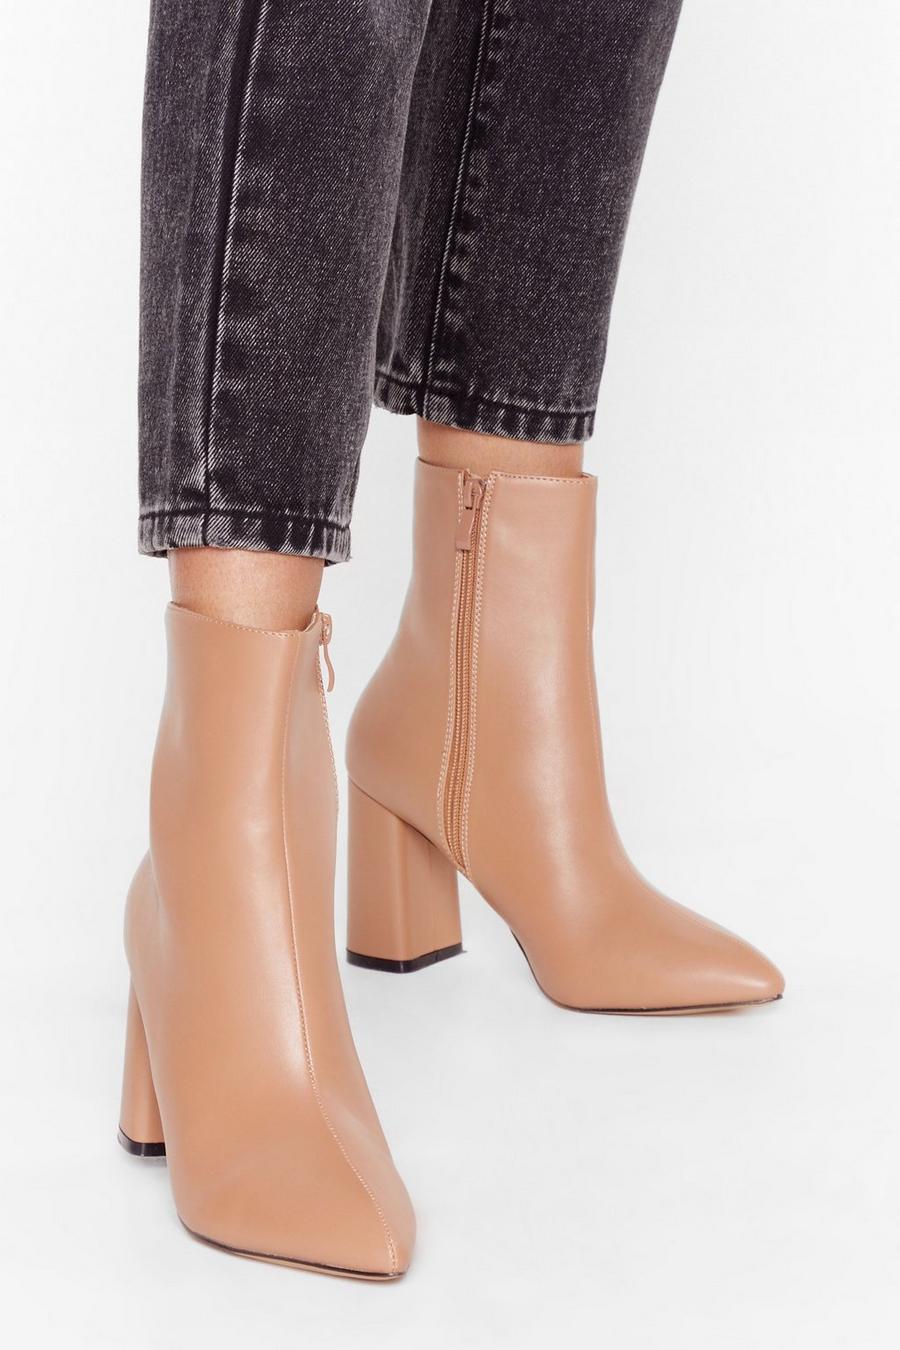 Hey Sole Sister Faux Leather Heeled Boots